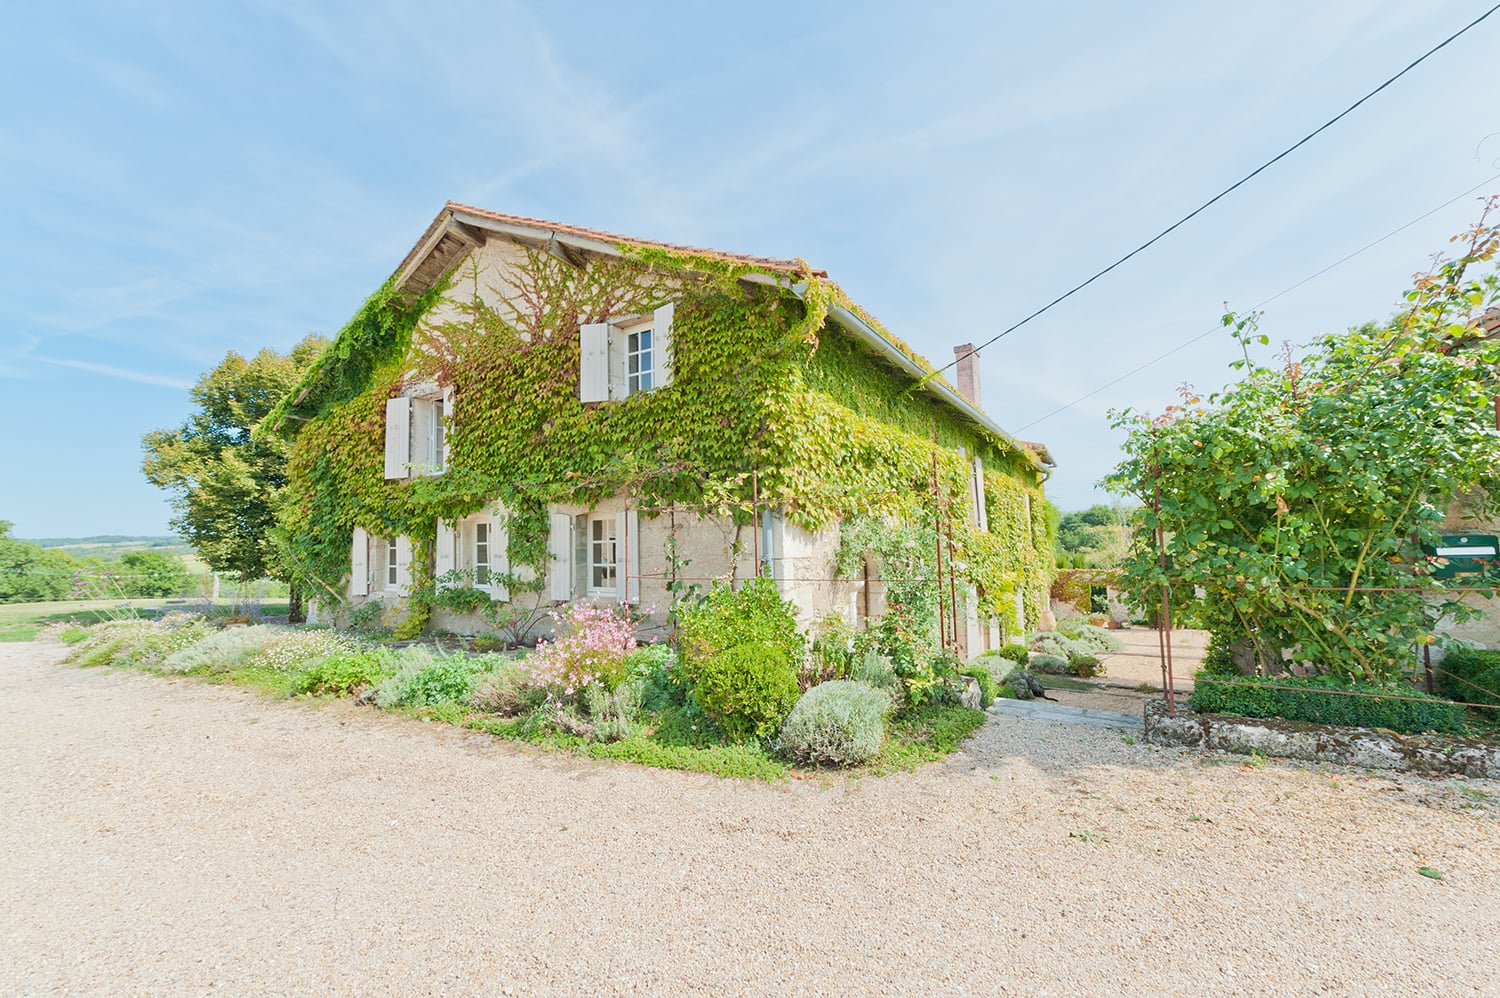 Rental home in Nouvelle-Aquitaine